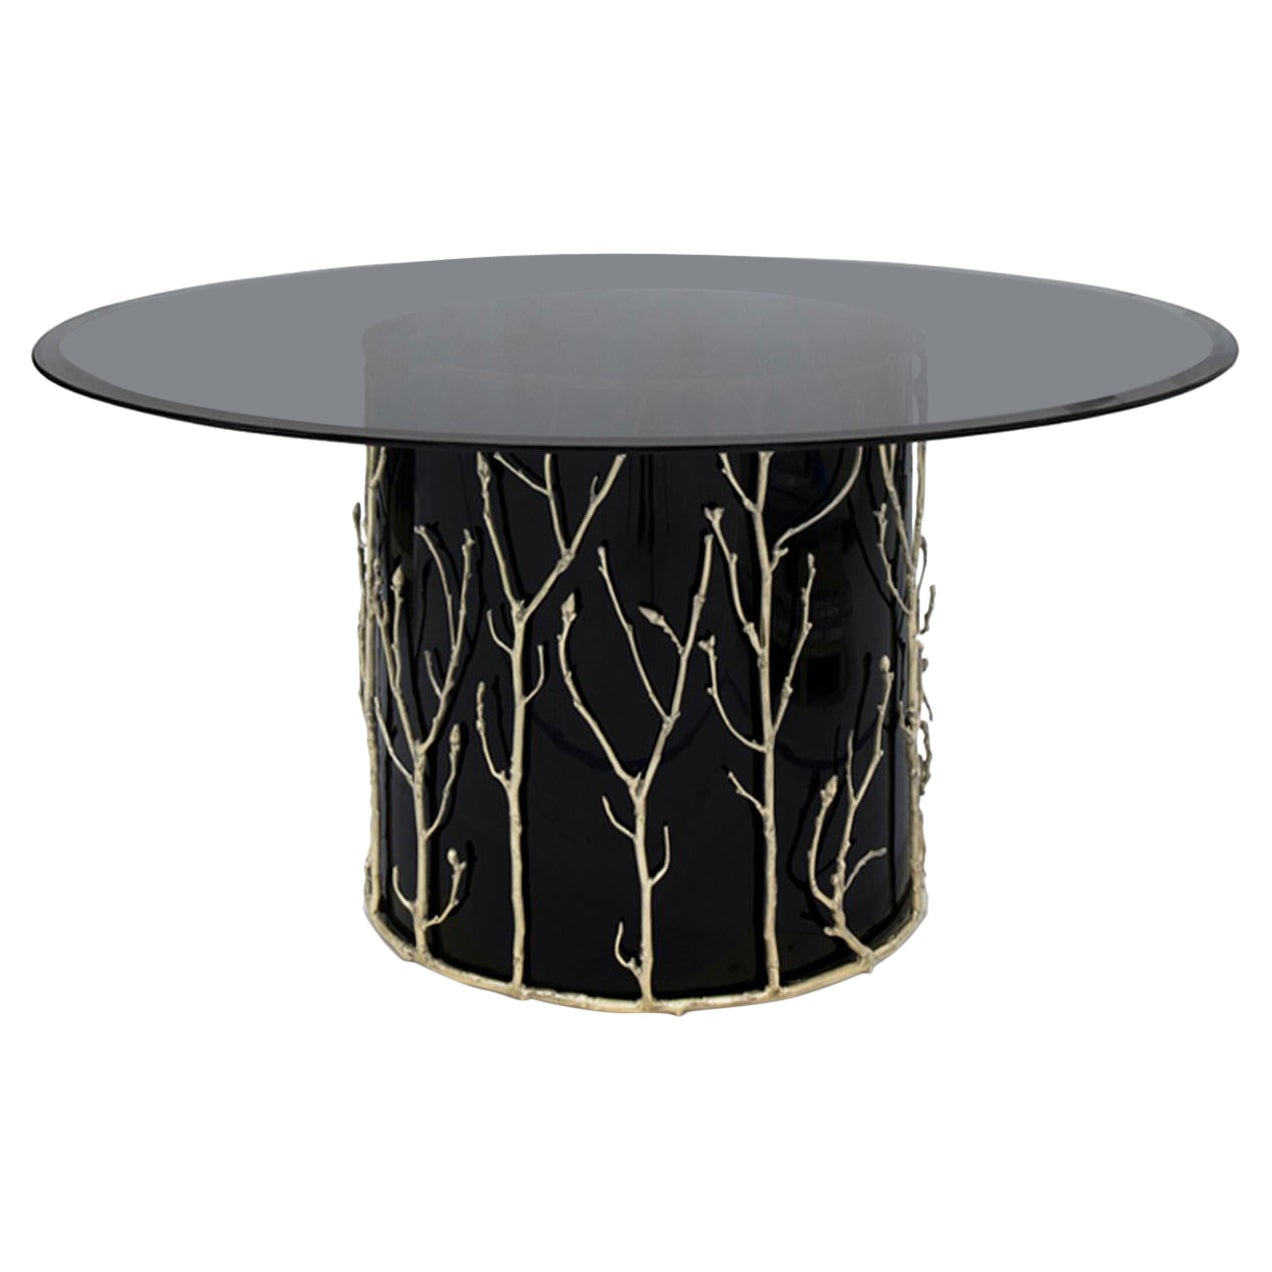 Original Dinning Table in Brass and Glass "Branche"